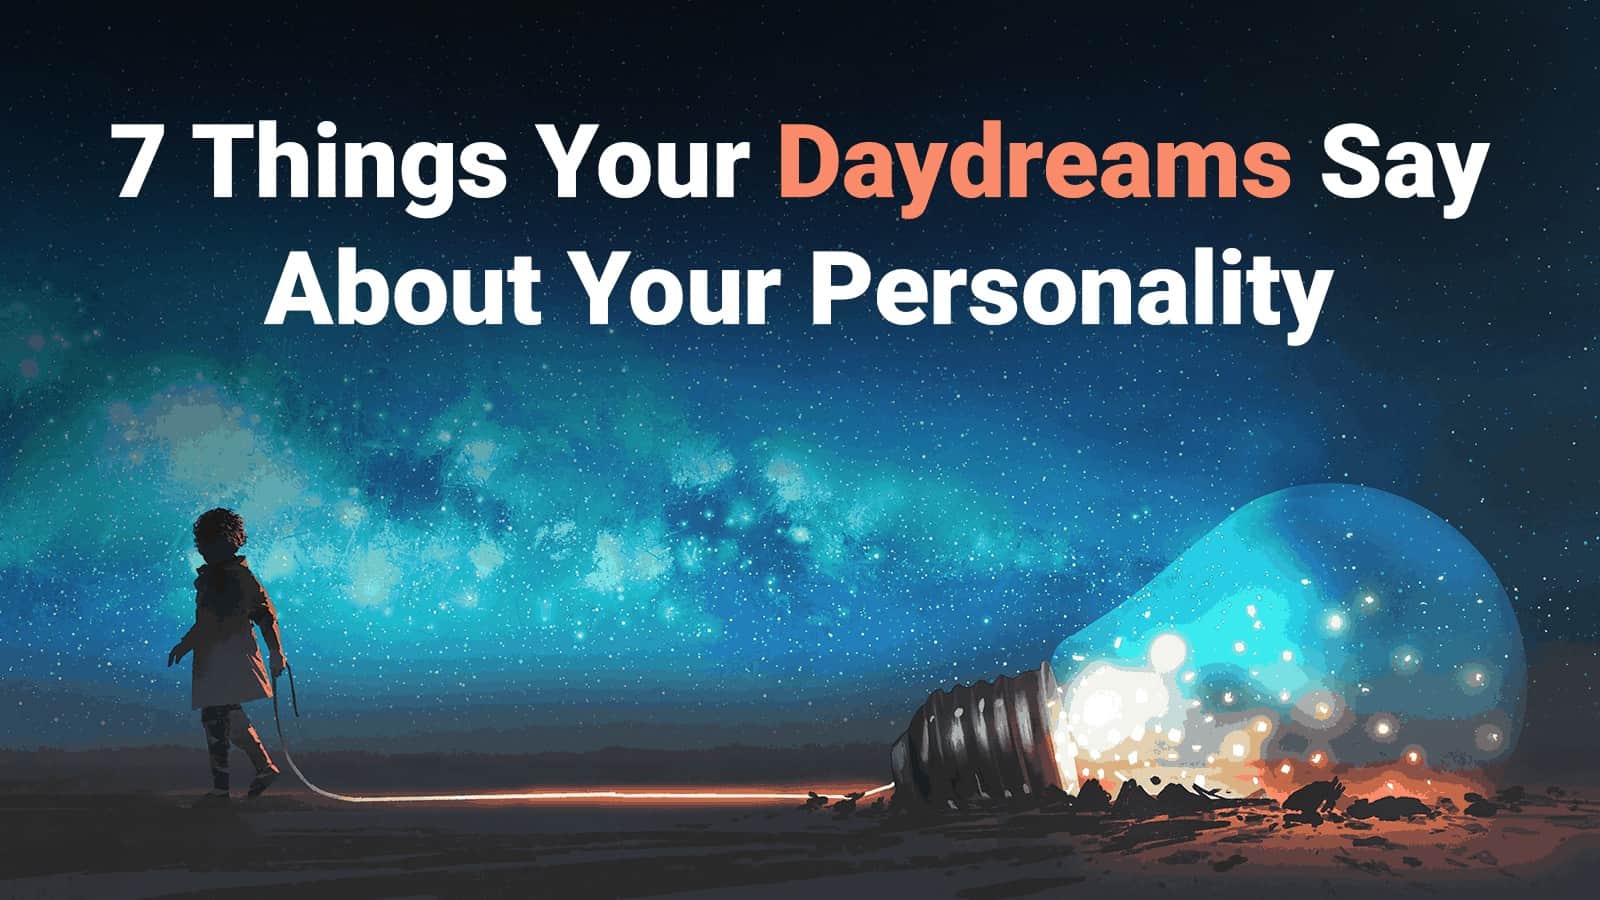 7 Things Your Daydreams Say About Your Personality